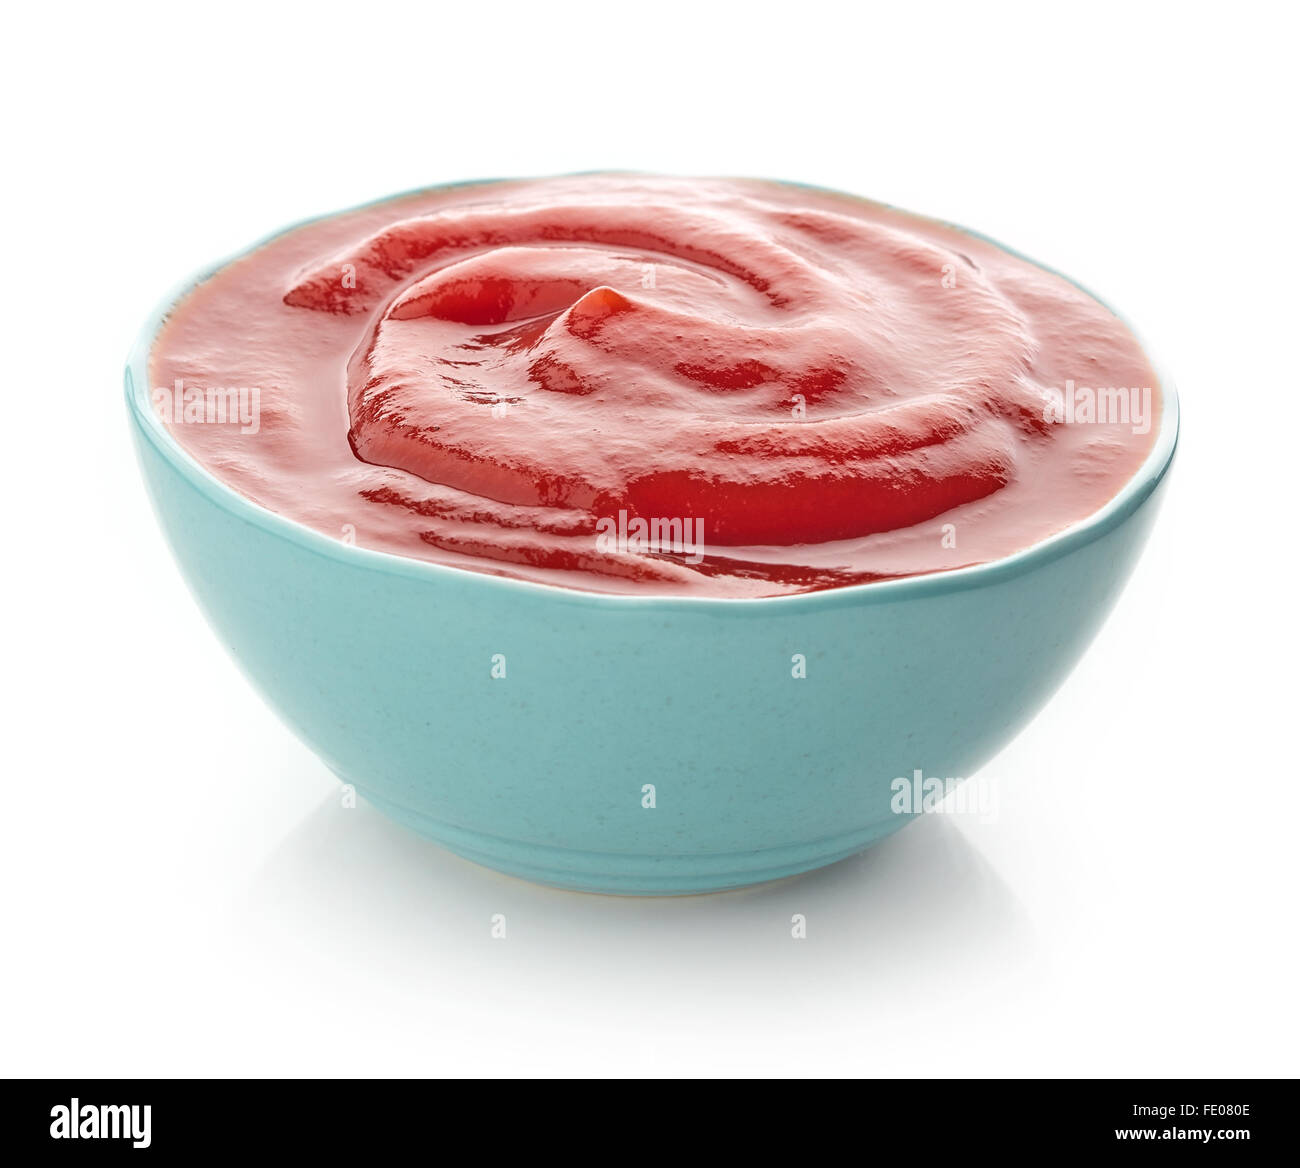 Blue bowl of ketchup or tomato sauce on white background Stock Photo